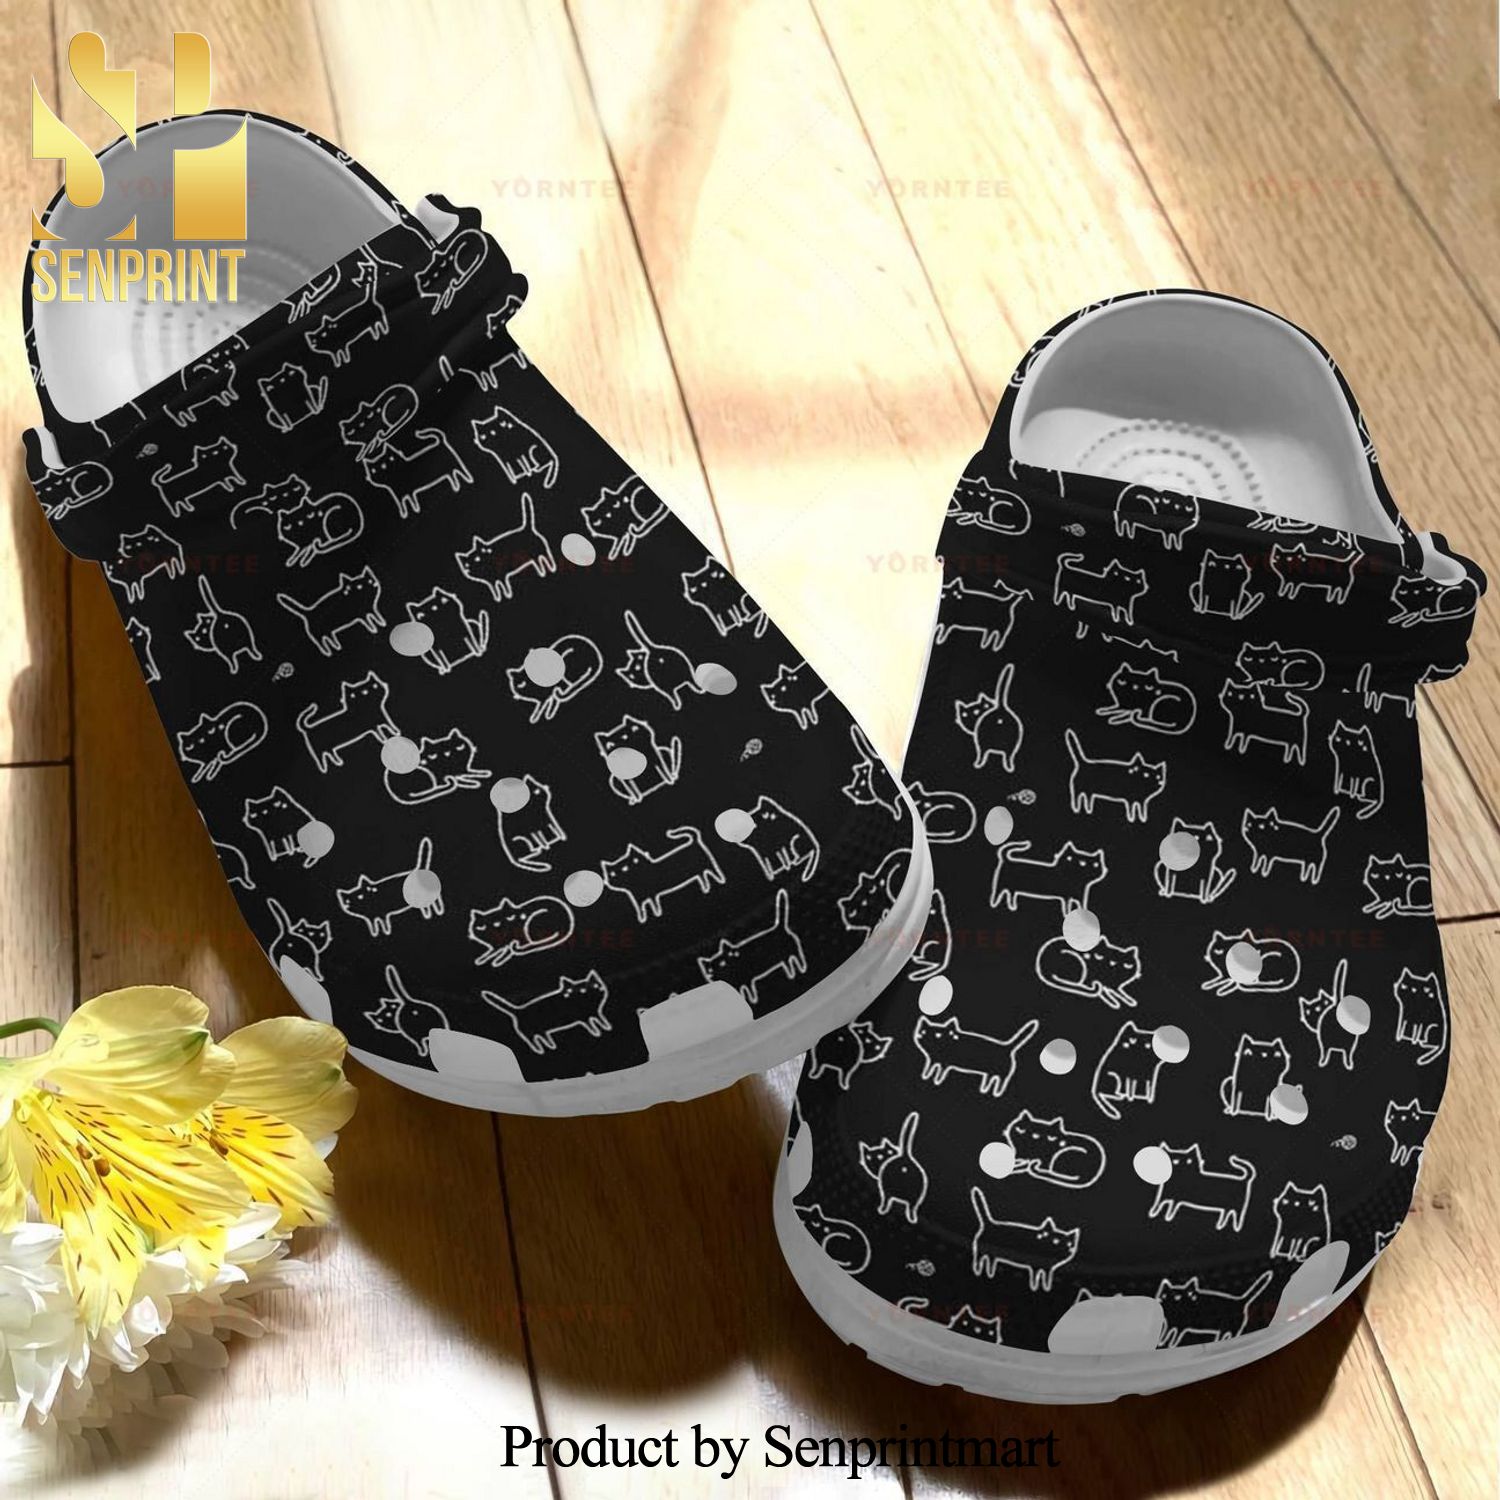 Black Cat 10 Gift For Lover New Outfit Unisex Crocs Crocband Clog